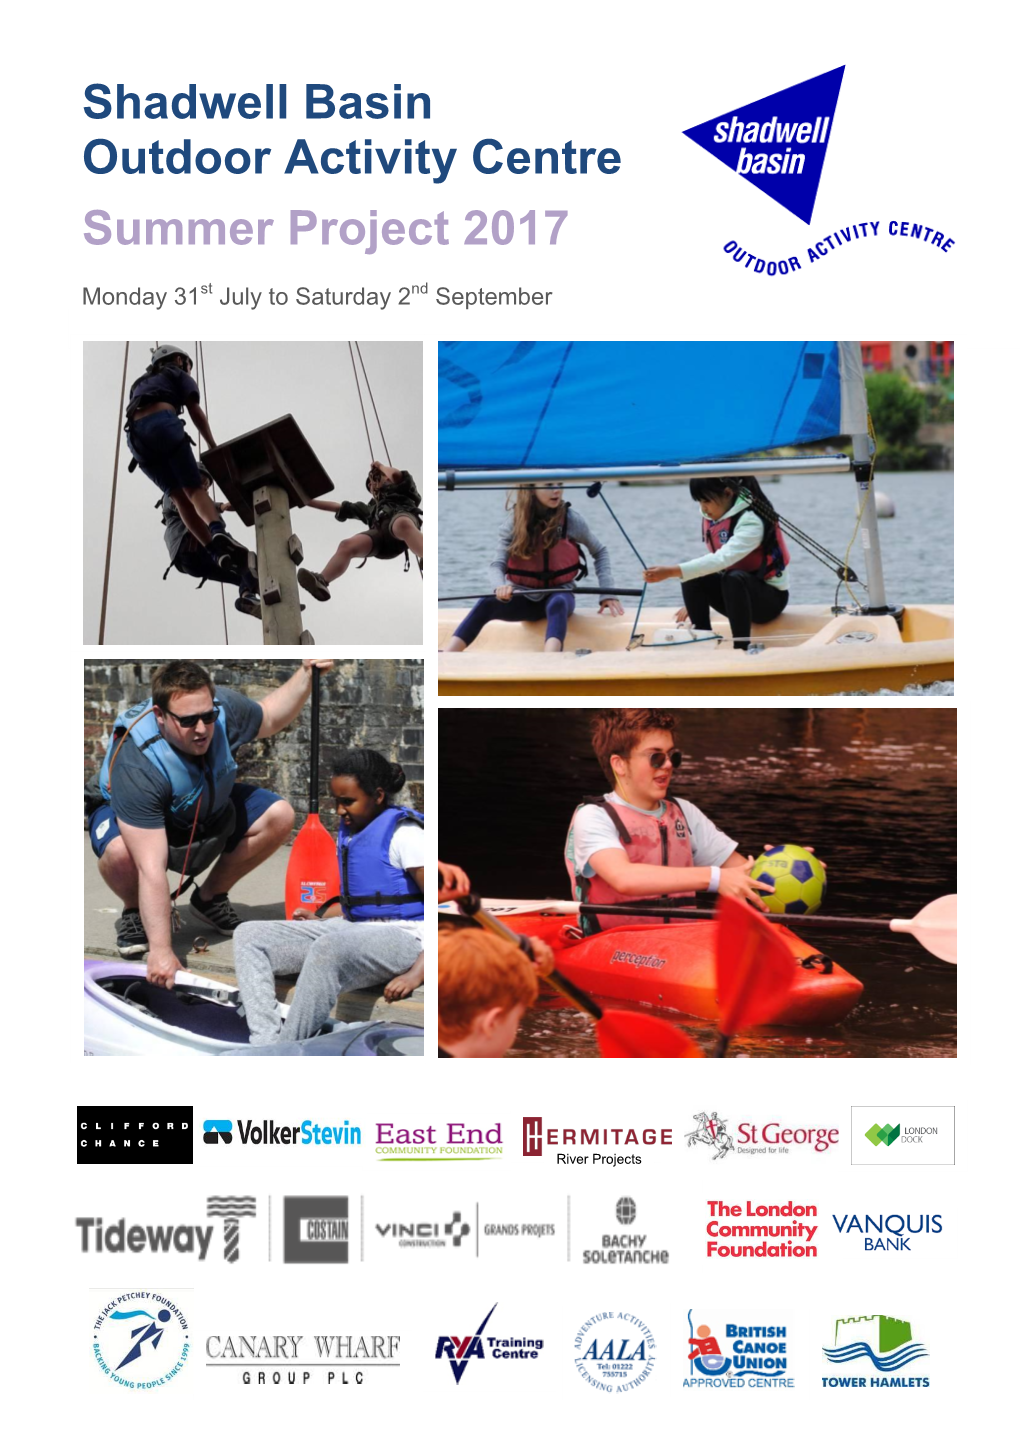 Shadwell Basin Outdoor Activity Centre Summer Project 2017